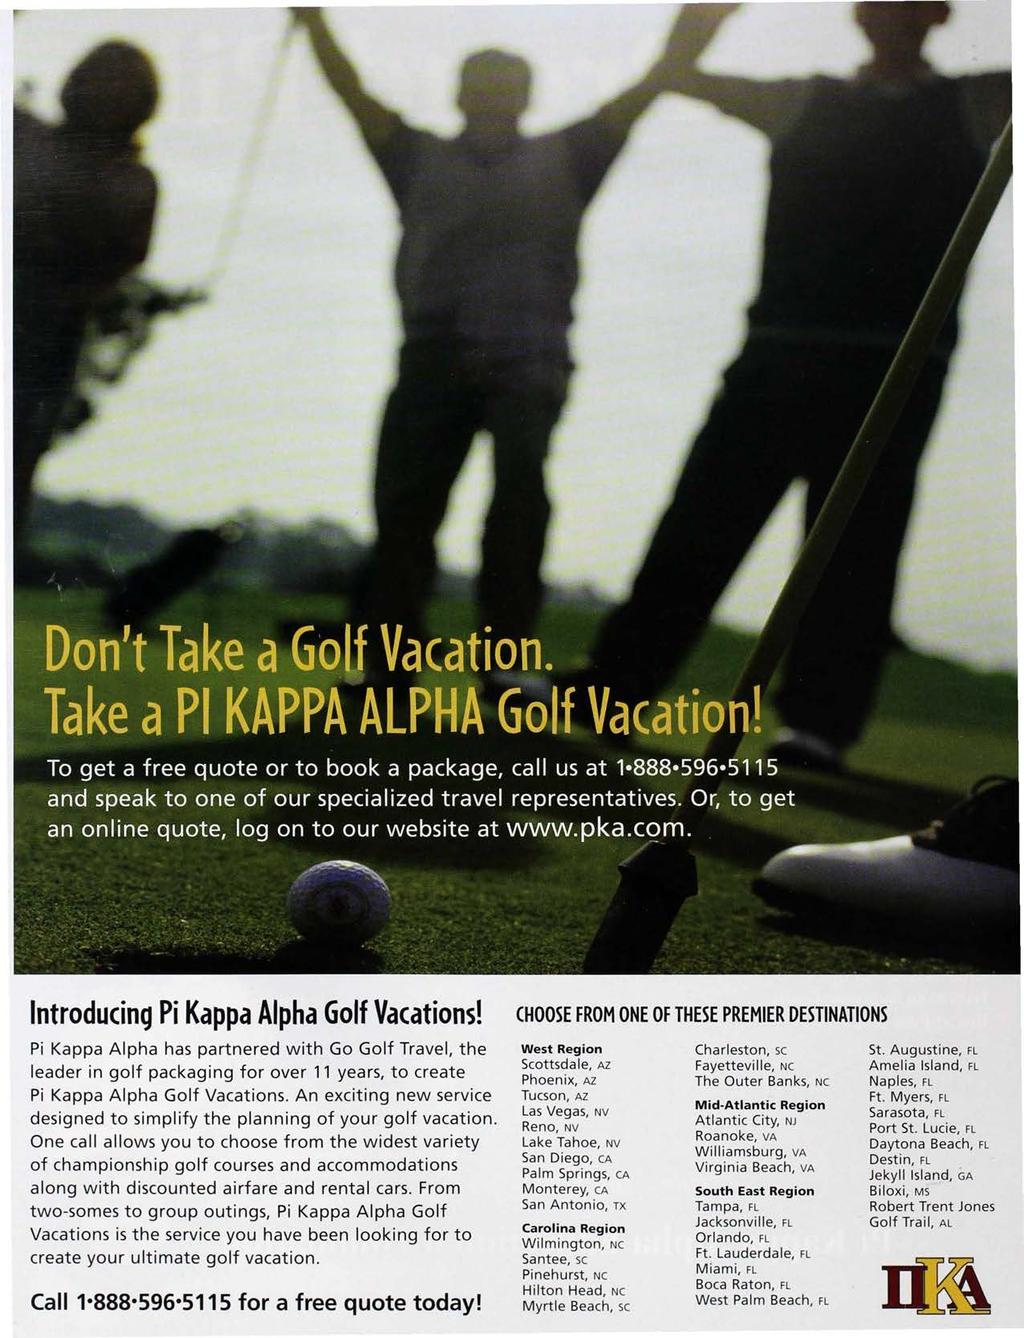 Introducing Pi Kappa Alpha Golf Vacations! Pi Kappa Alpha has partnered with Go Golf Travel, the leader in golf packaging for over 11 years, to create Pi Kappa Alpha Golf Vacations.